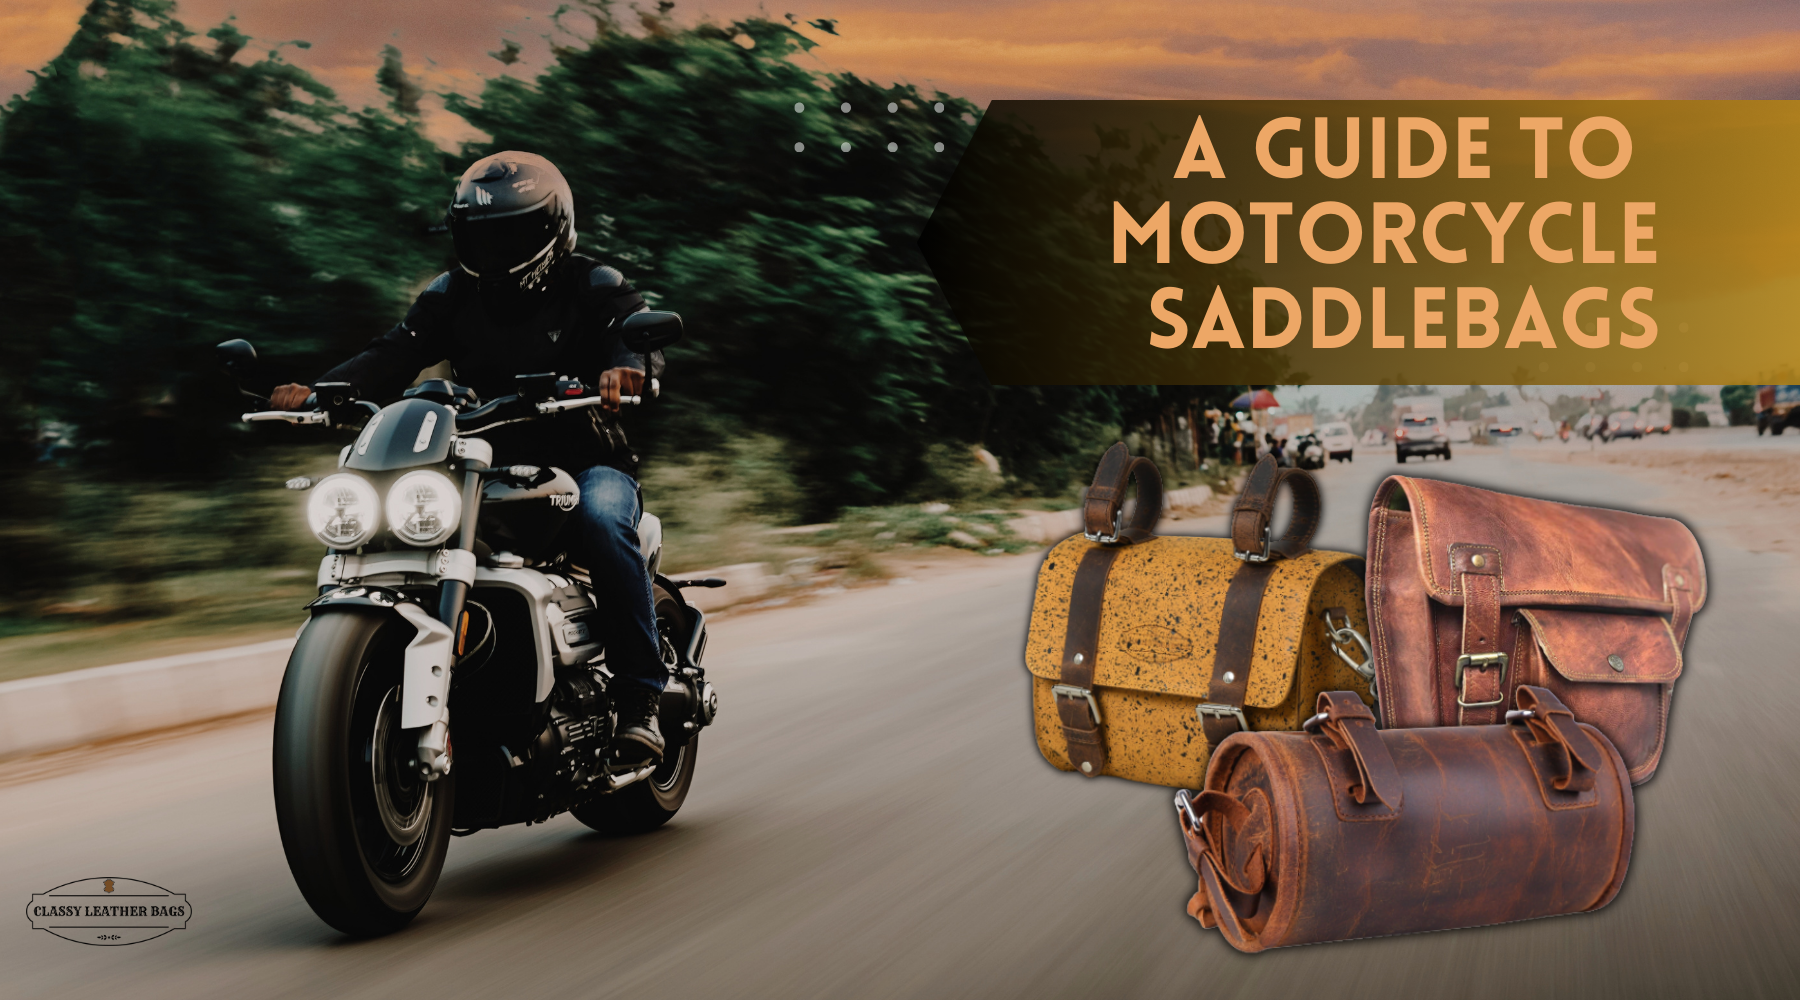 On The Road In Style: A Guide to Motorcycle Saddlebags